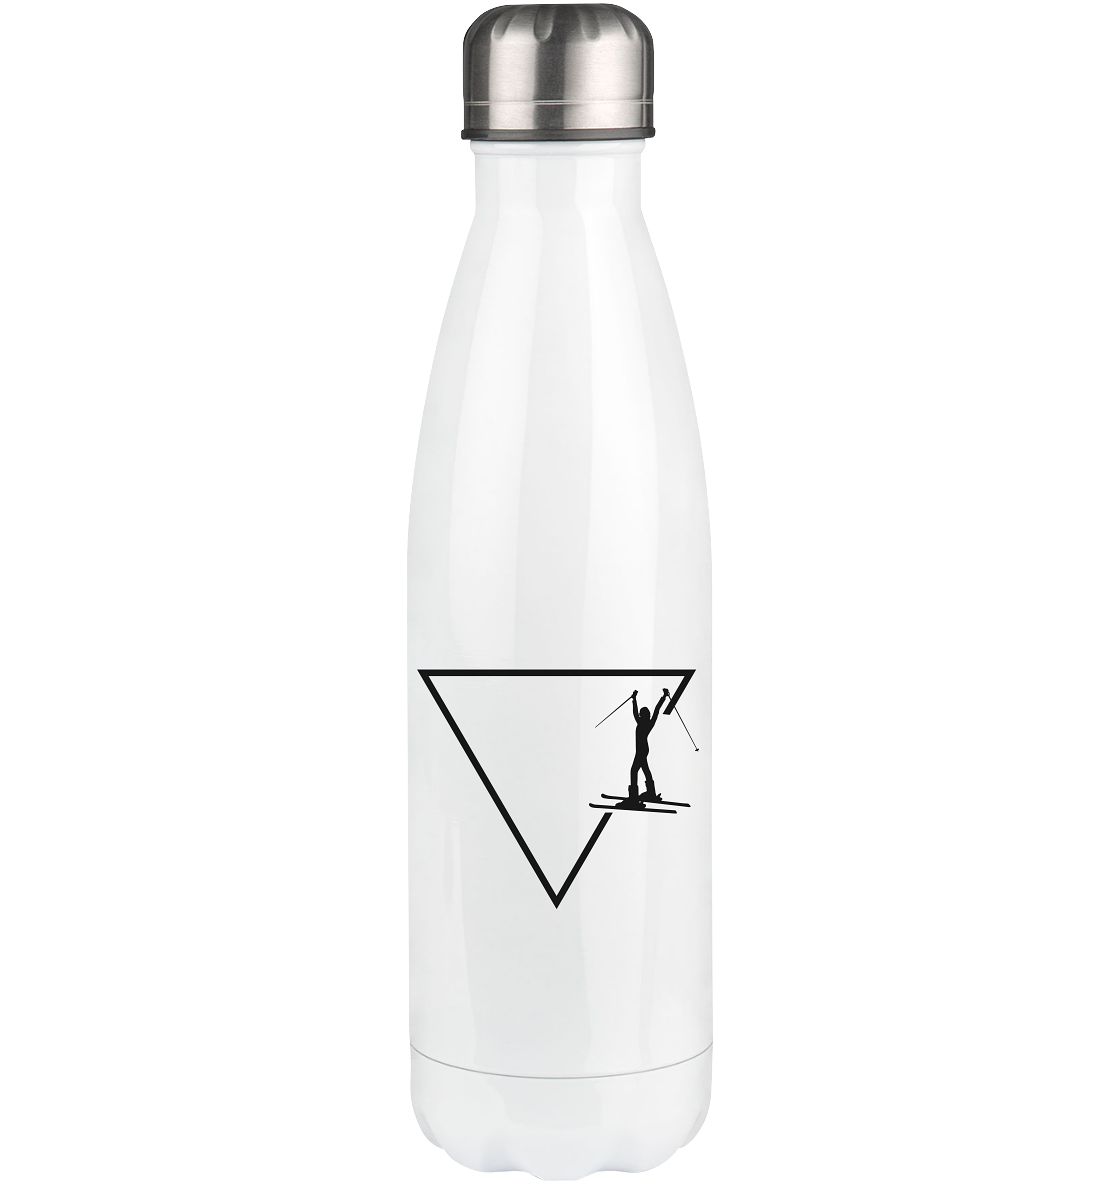 Triangle 1 and Skiing - Edelstahl Thermosflasche klettern ski 500ml